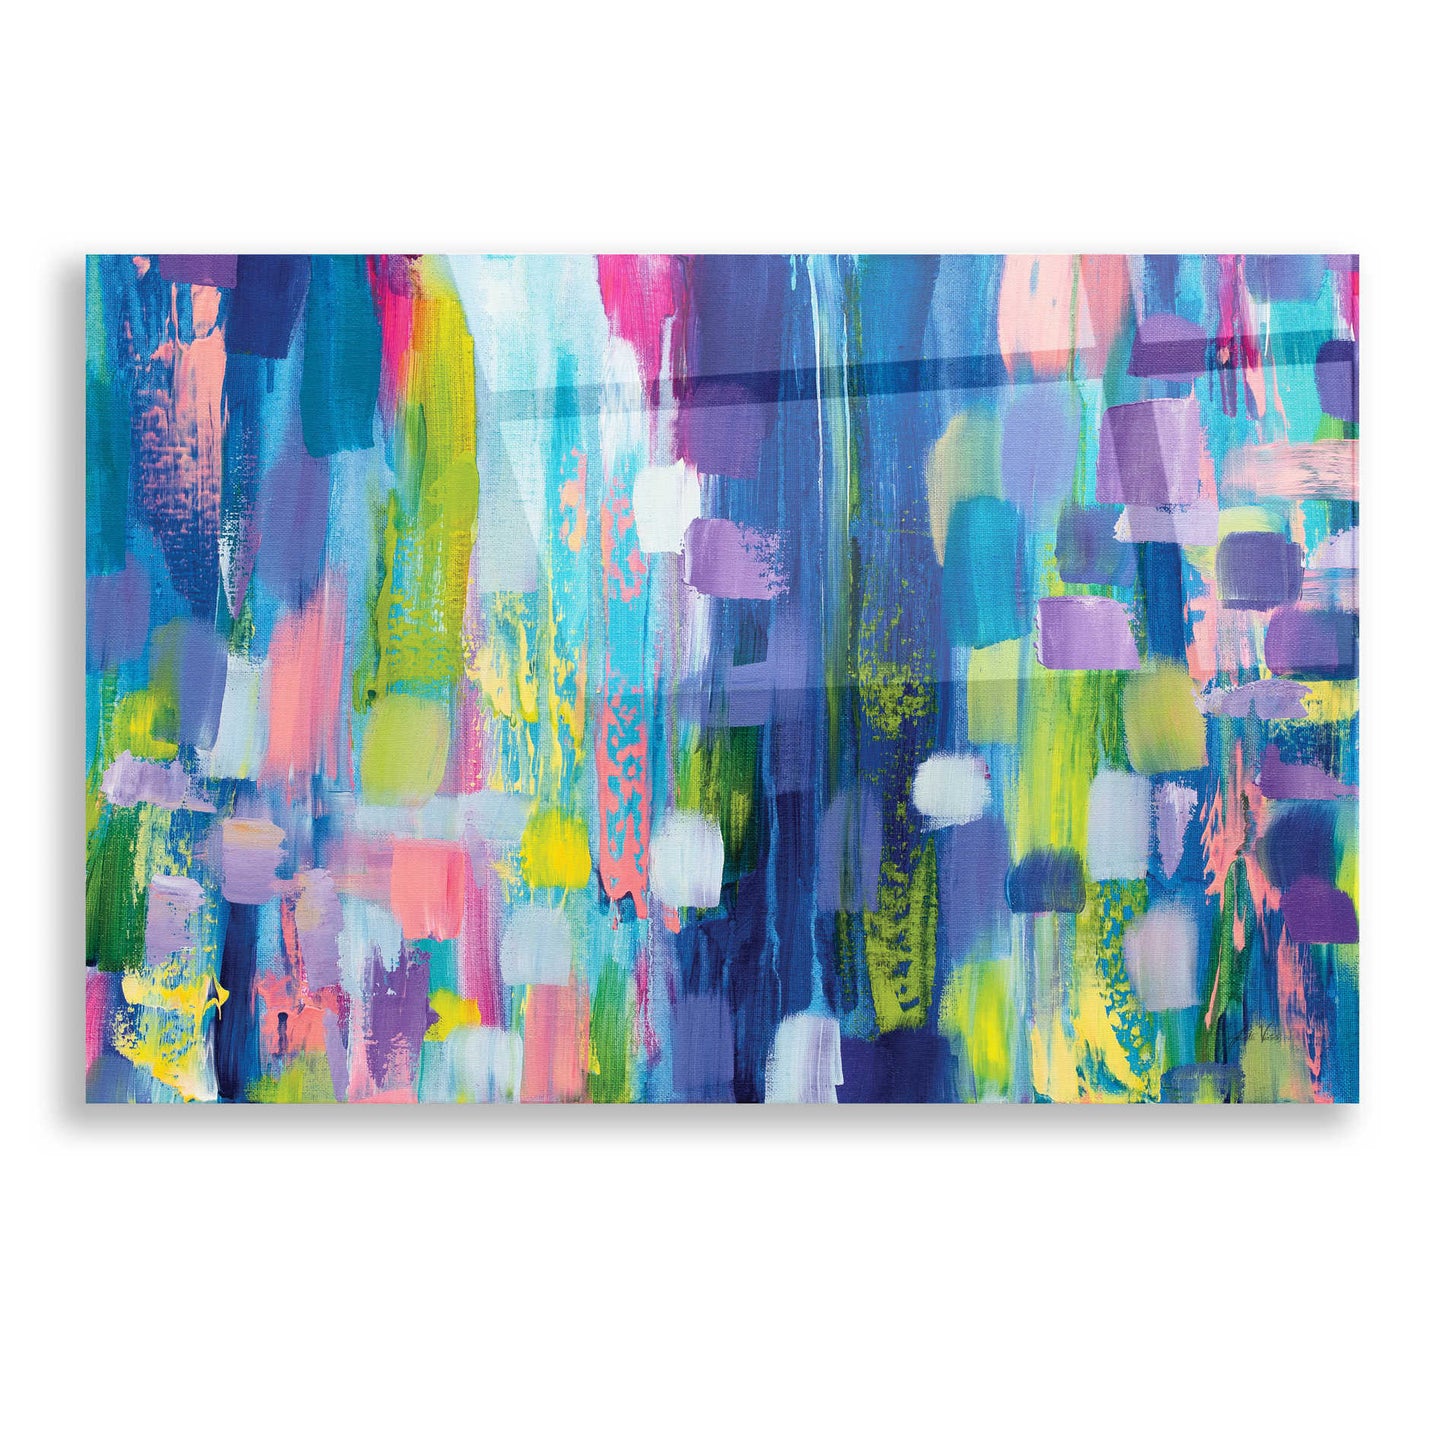 Epic Art 'Radiance' by Jeanette Vertentes, Acrylic Glass Wall Art